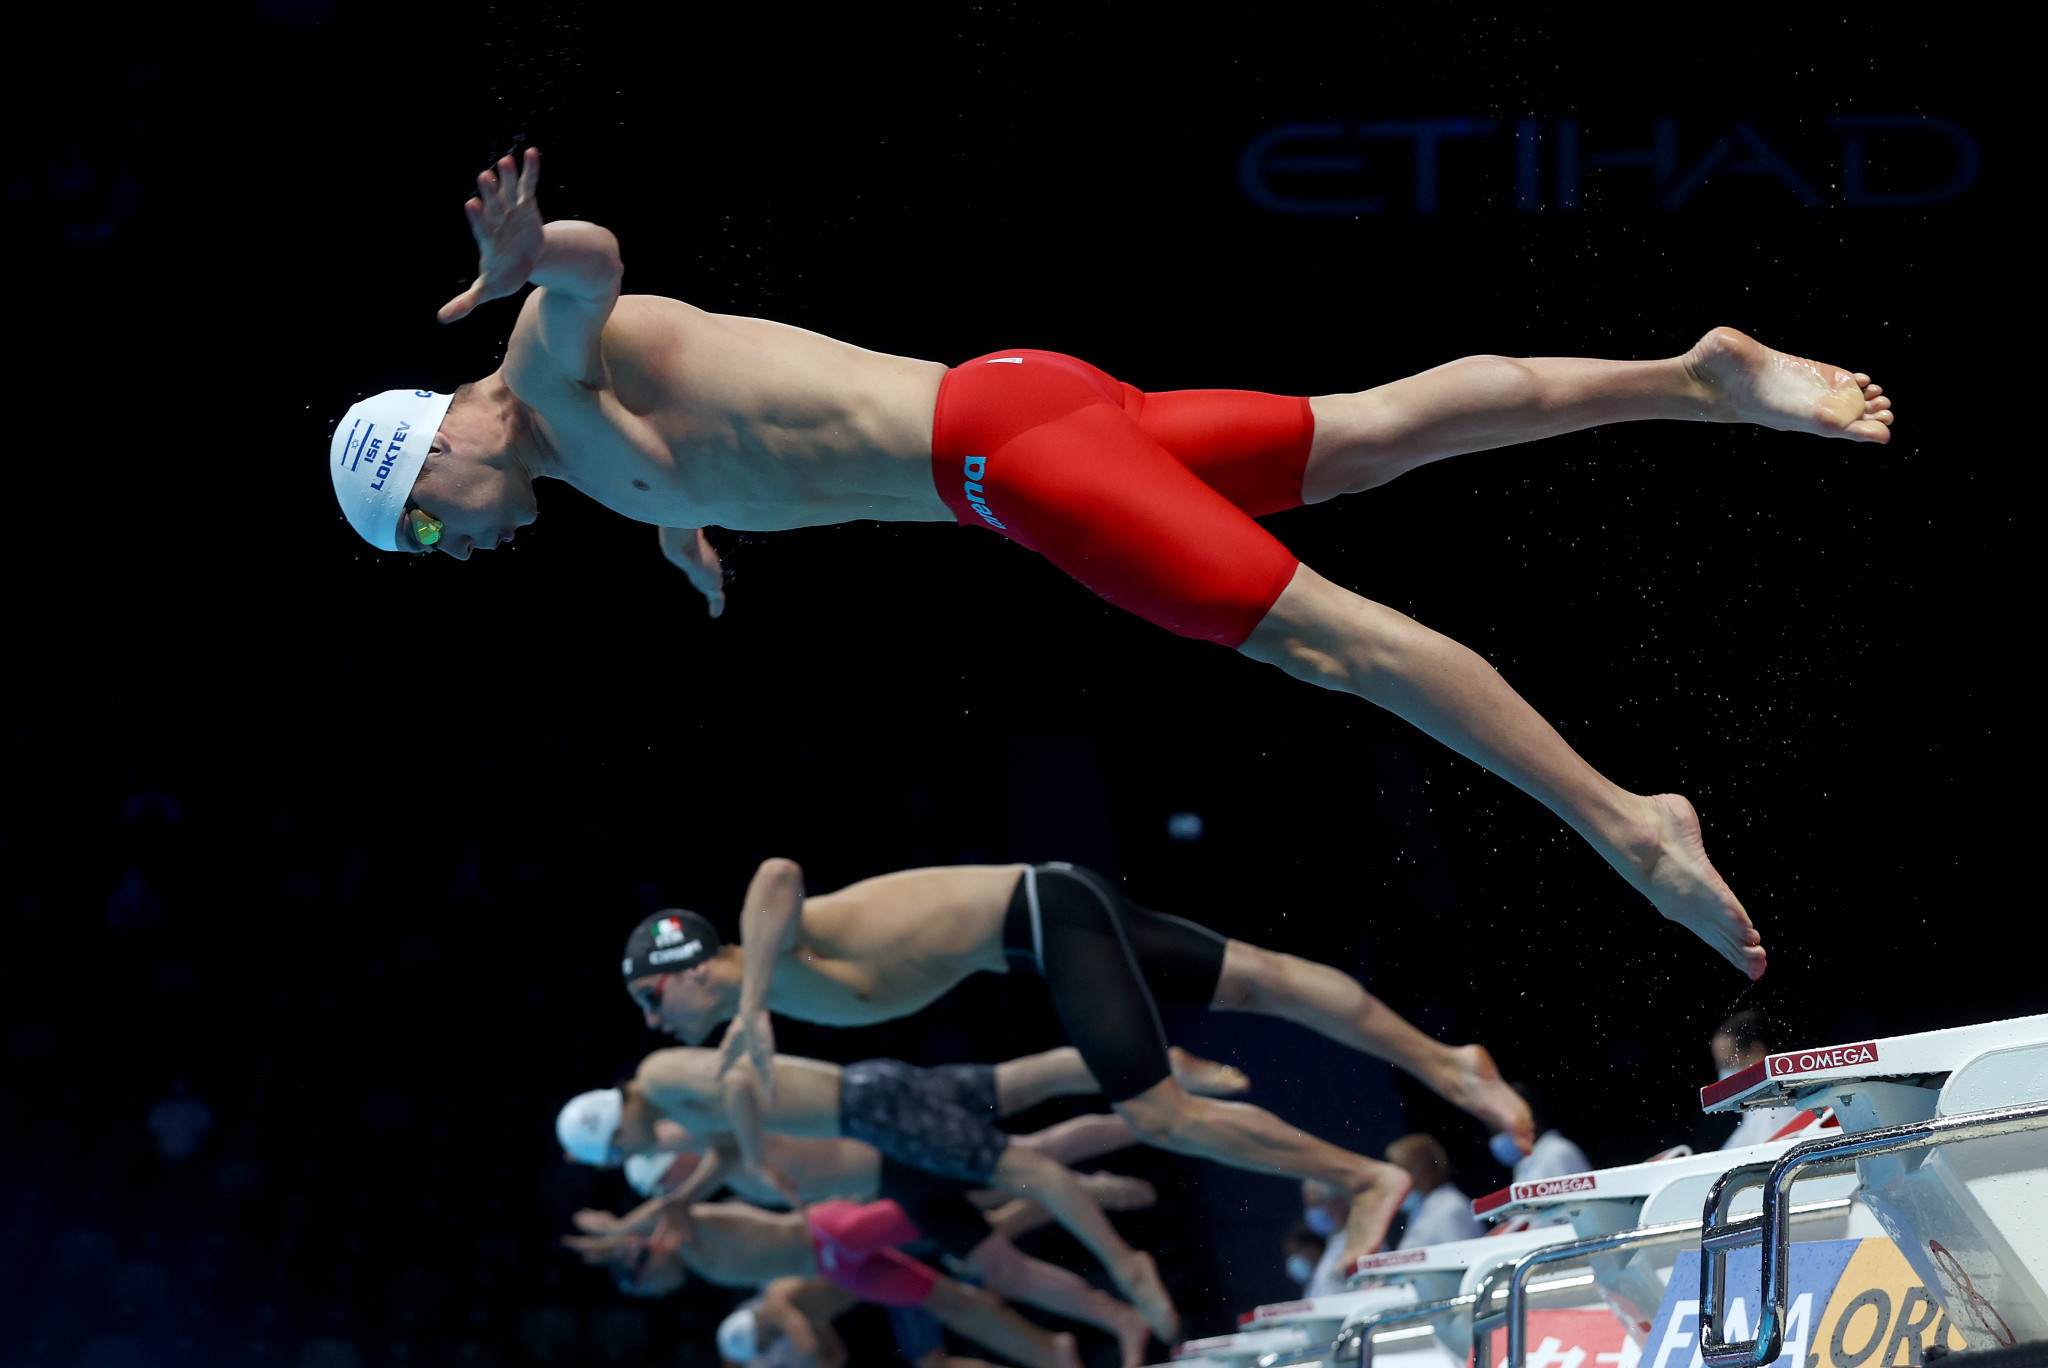 Abu Dhabi stage the World Swimming Championships (25m) earlier this month ©Getty Images